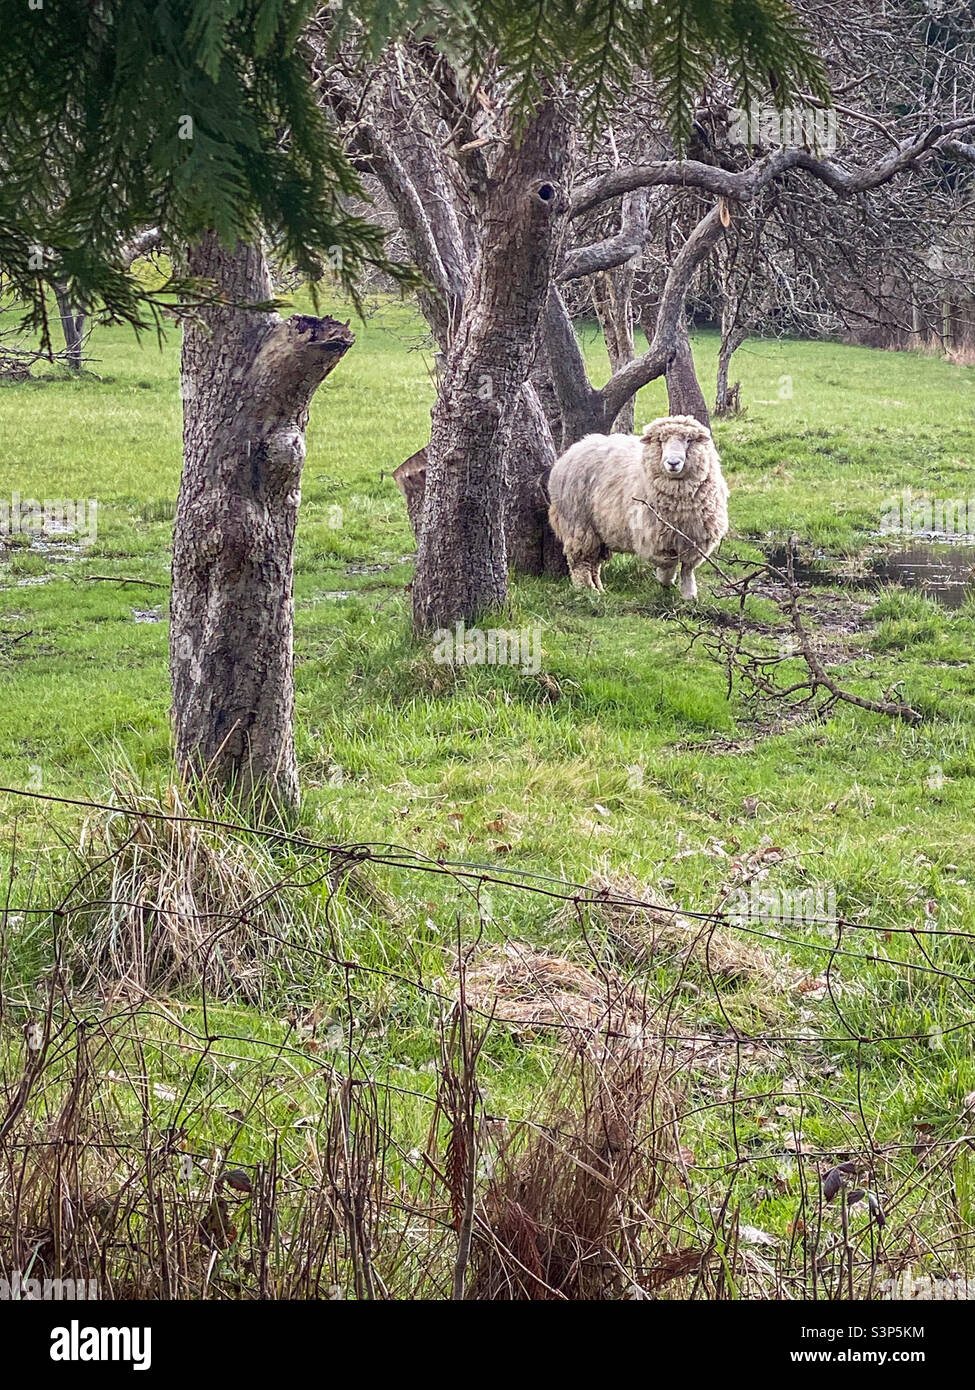 A large, shaggy sheep stands in a grassy orchard beside a row of neglected, misshapen apple trees, looking at the camera across a small wire fence. Stock Photo